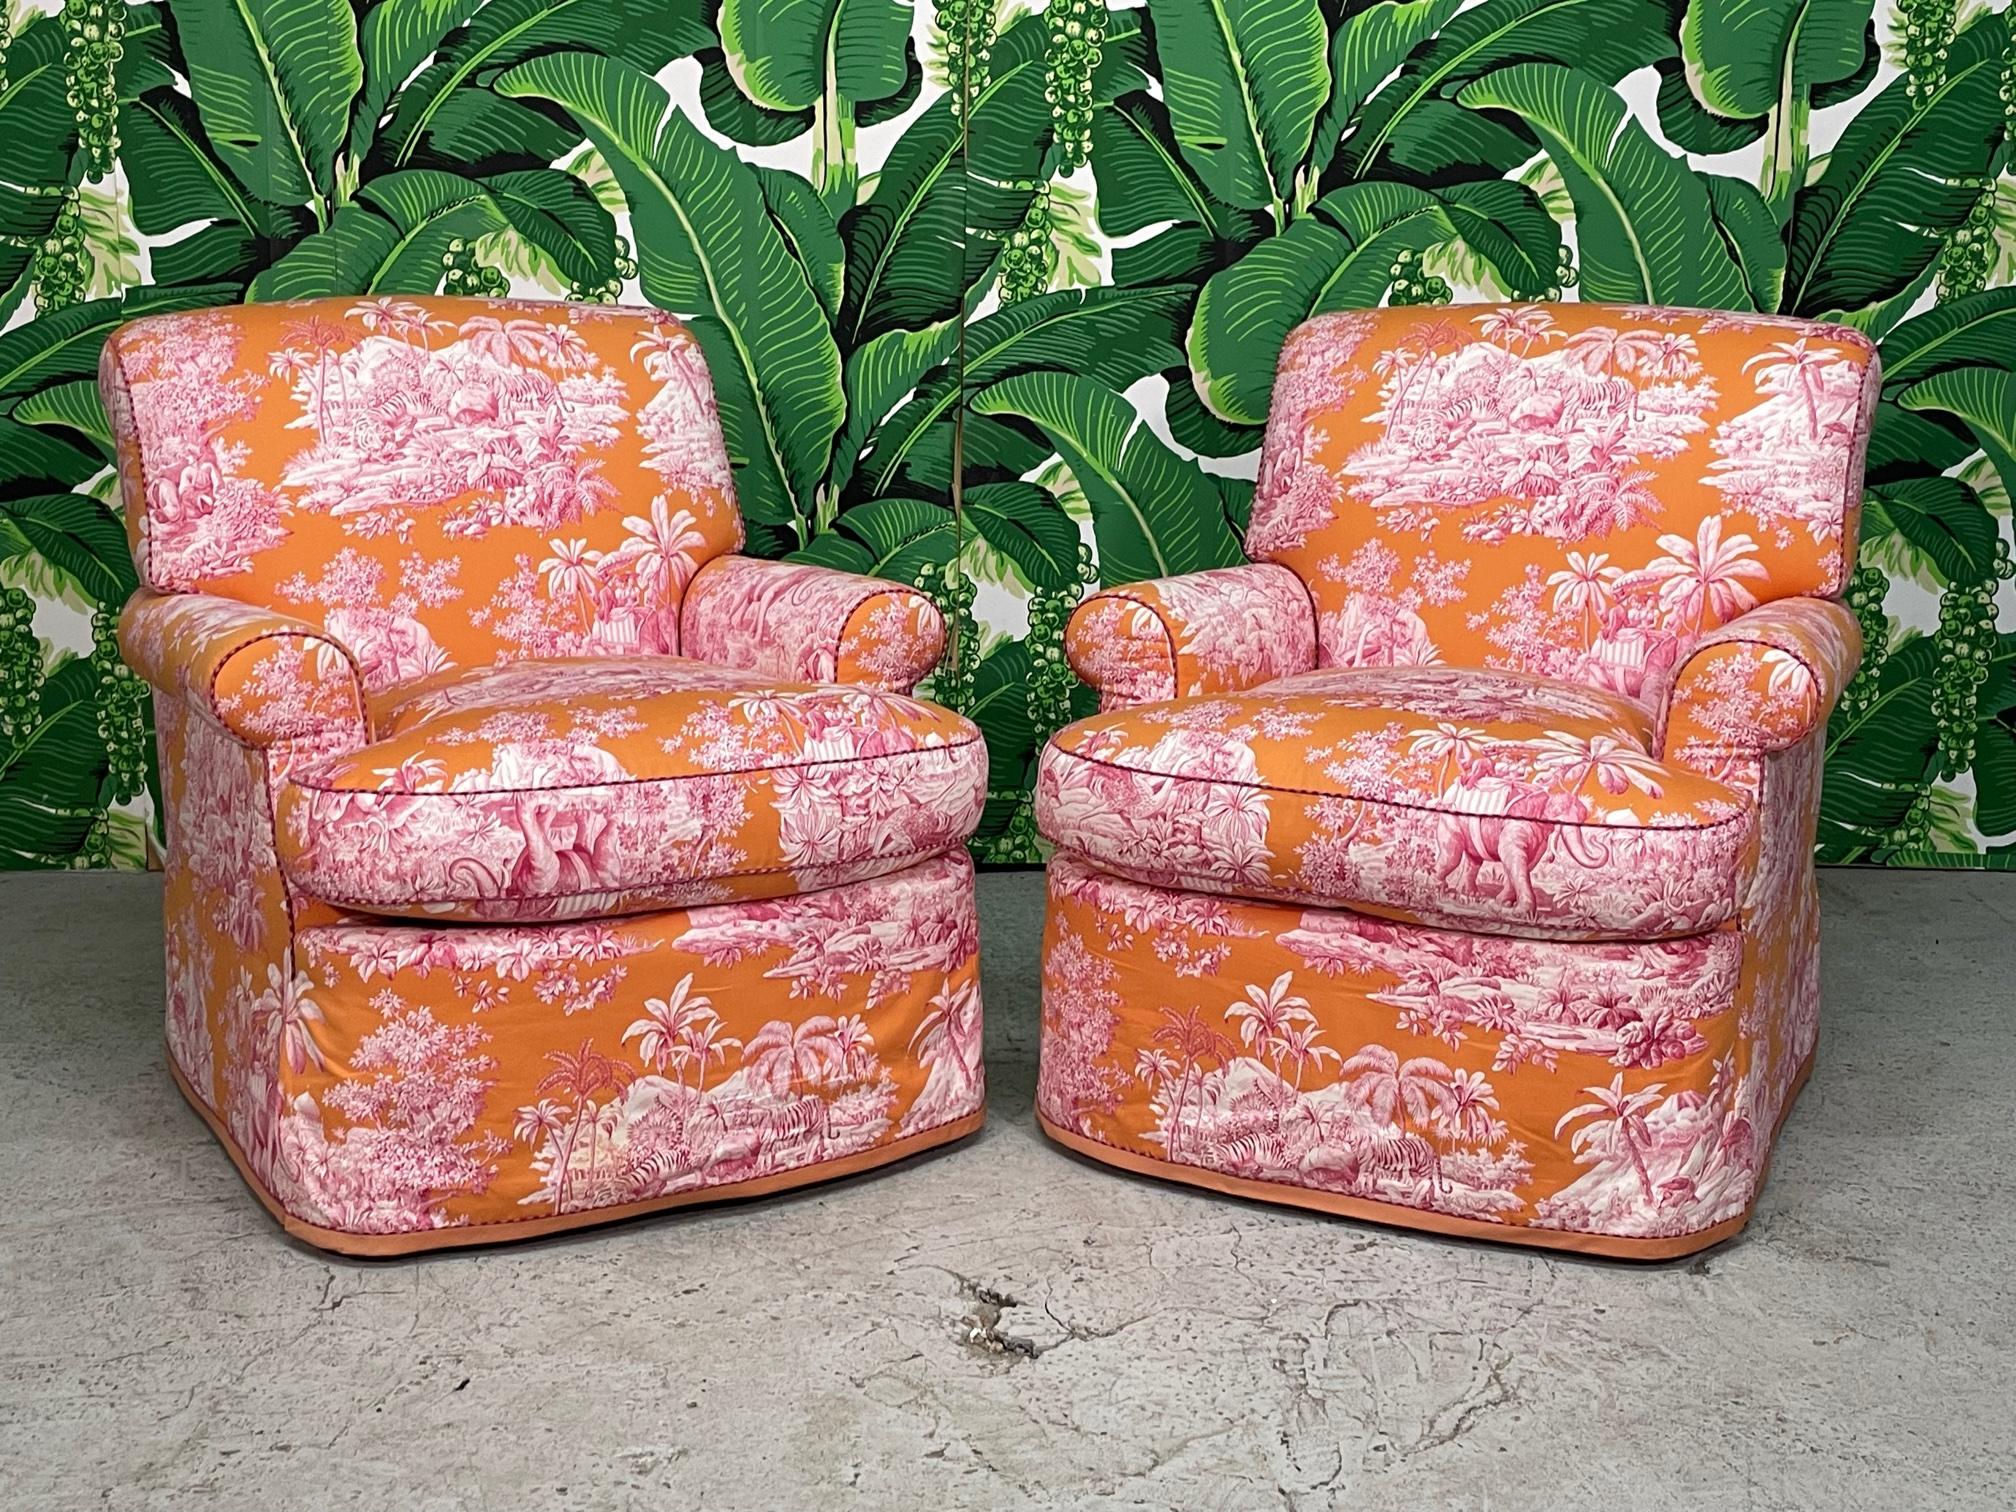 Pair of fully upholstered club chairs by Brunshwig & Fils feature down filled cushions and a bright chinoiserie print. Label no longer present, but we have the matching sofa (marked) also for sale.
Shipping to most of the continental US is $250 to